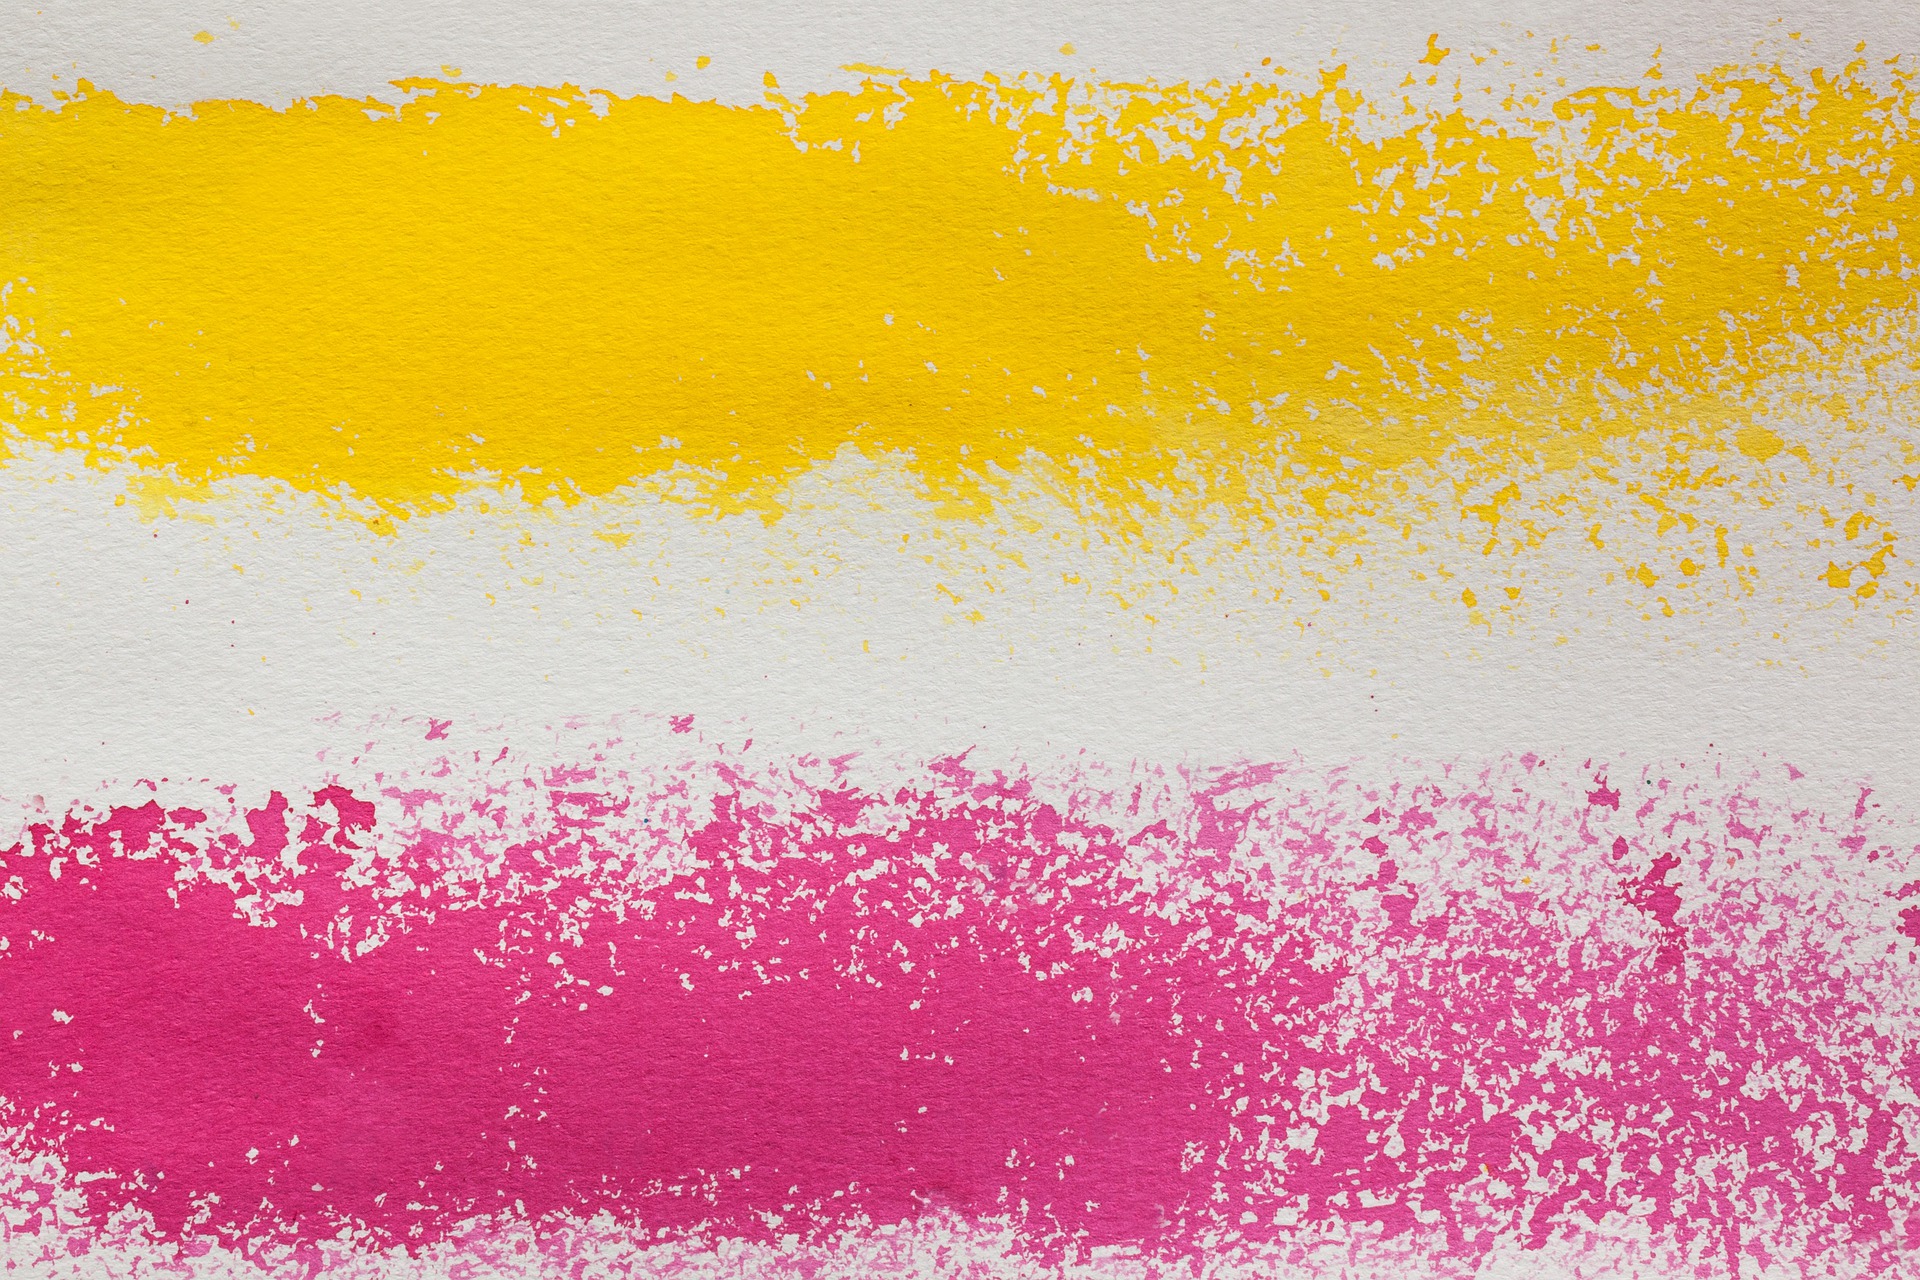 What Color Yellow and Pink Make When Mixed? - Hood MWR